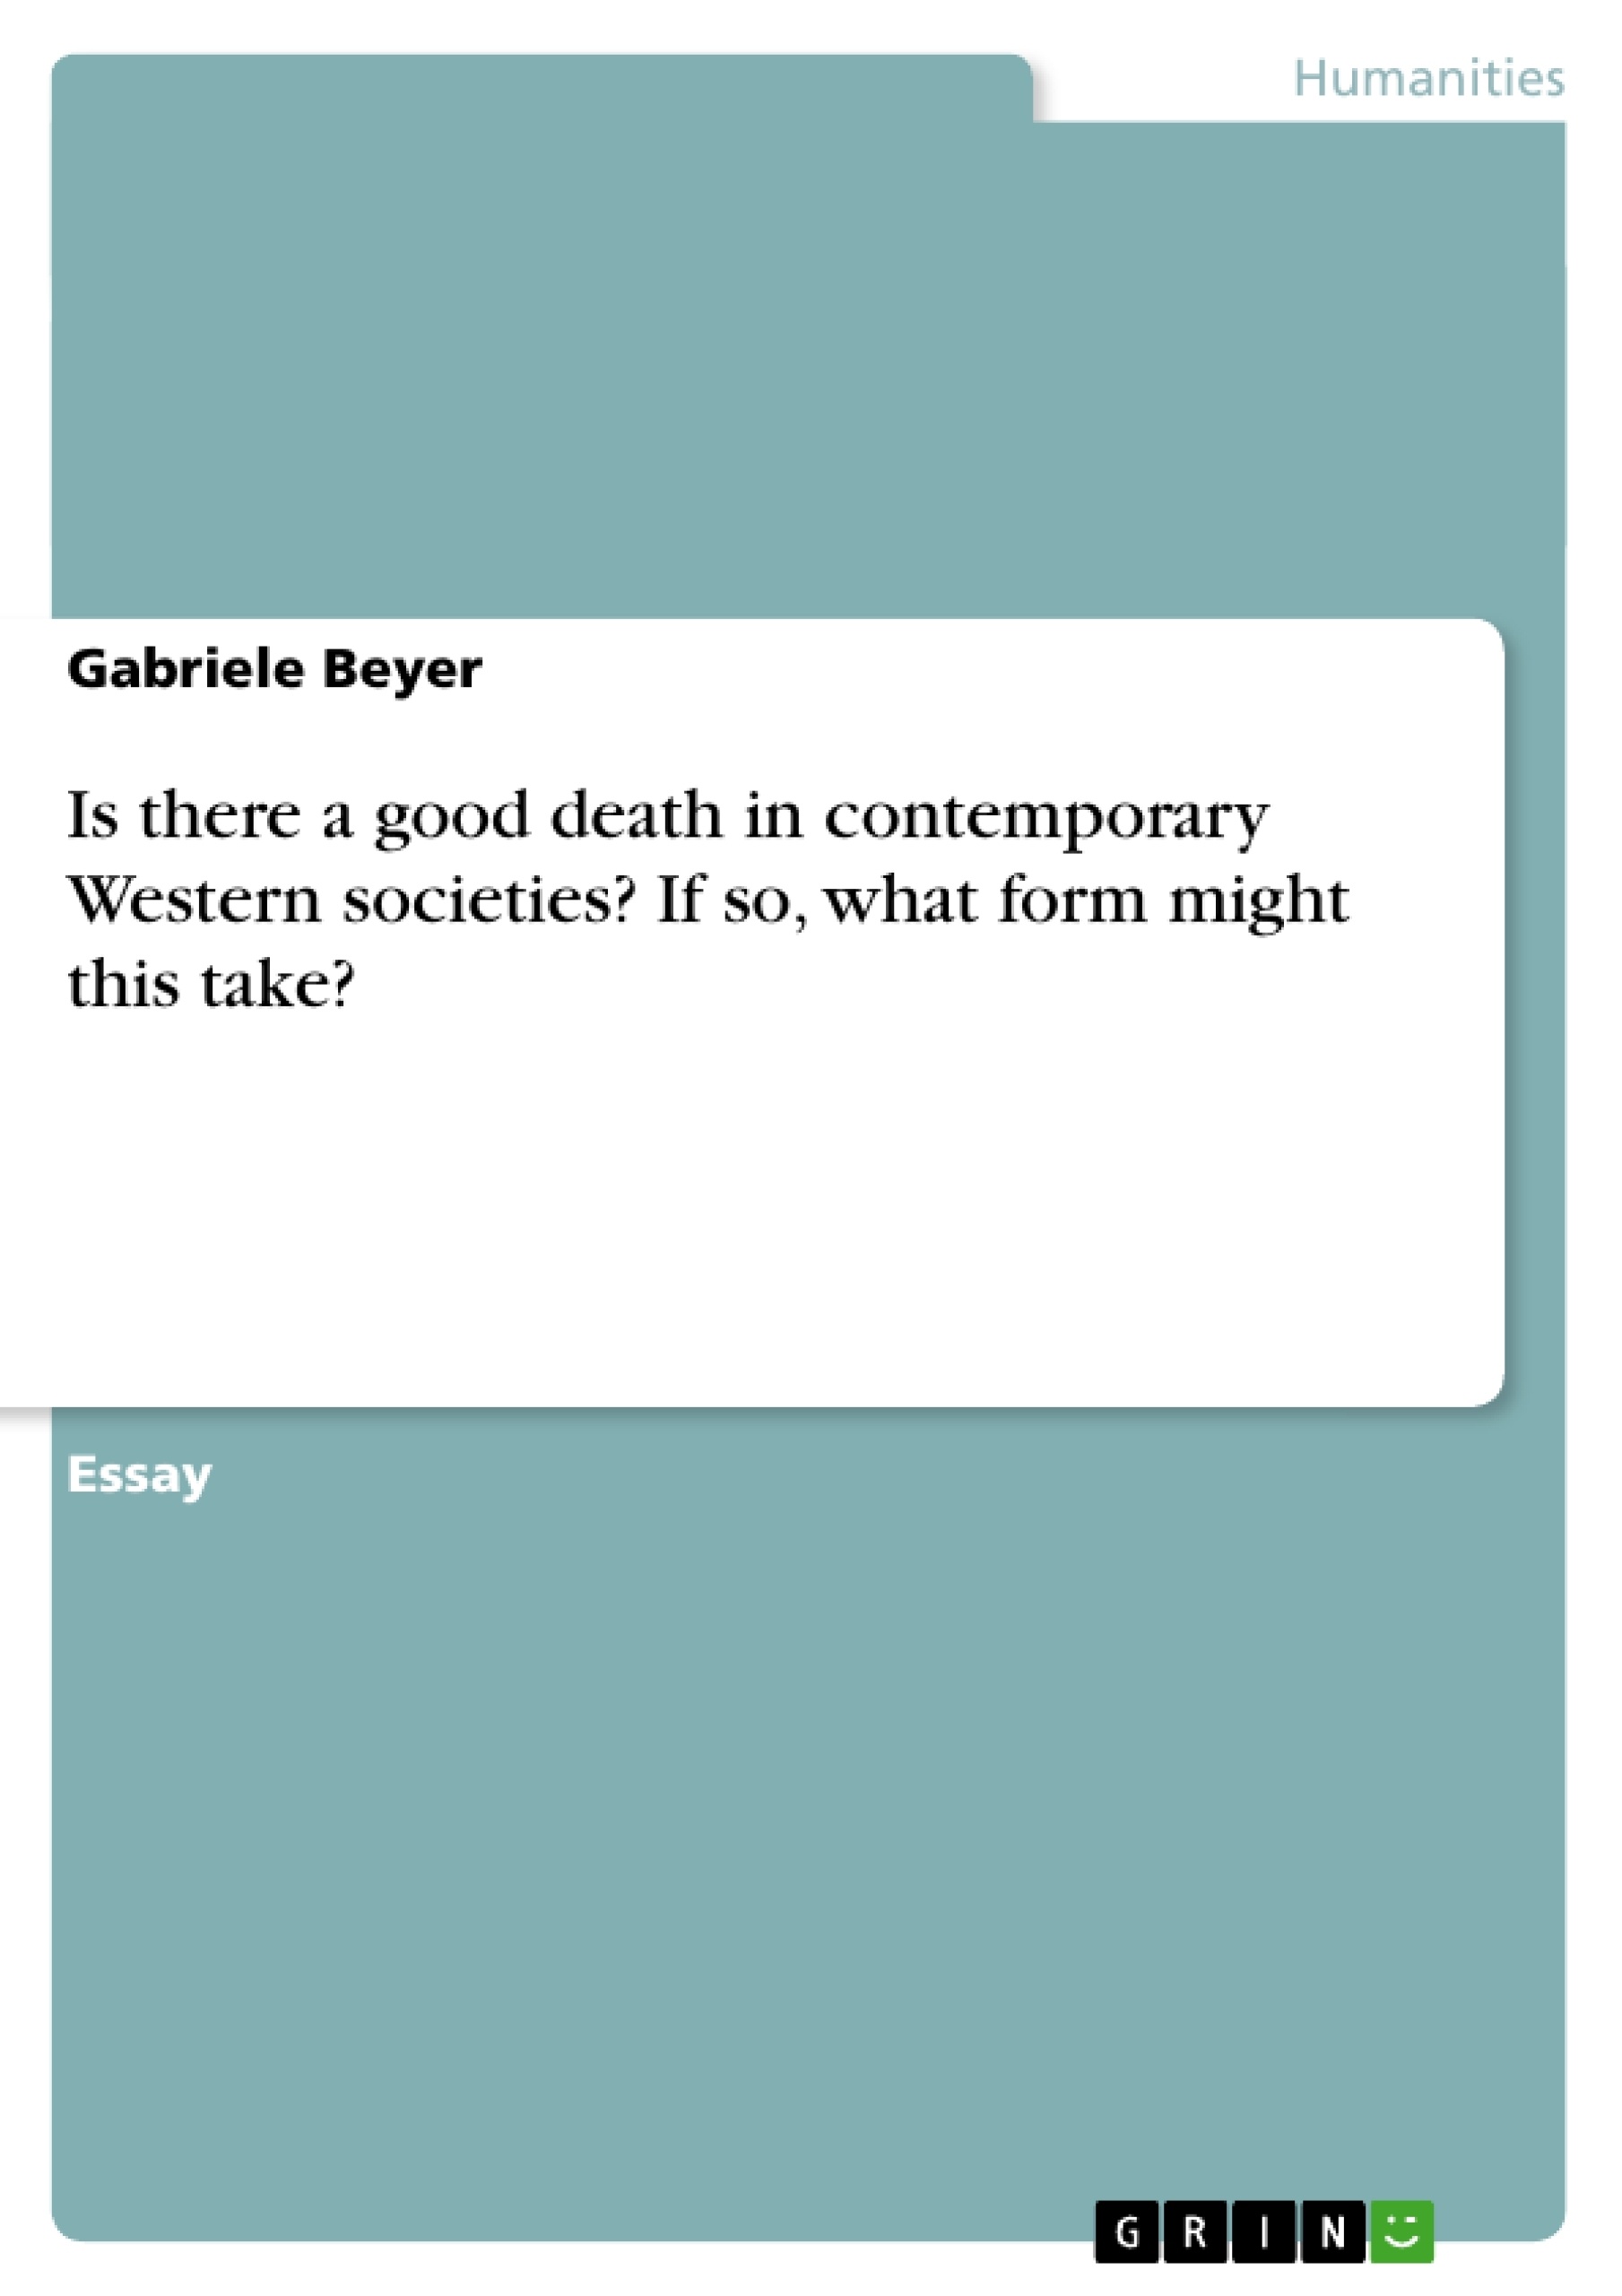 Título: Is there a good death  in contemporary Western societies? If so, what form might this take?